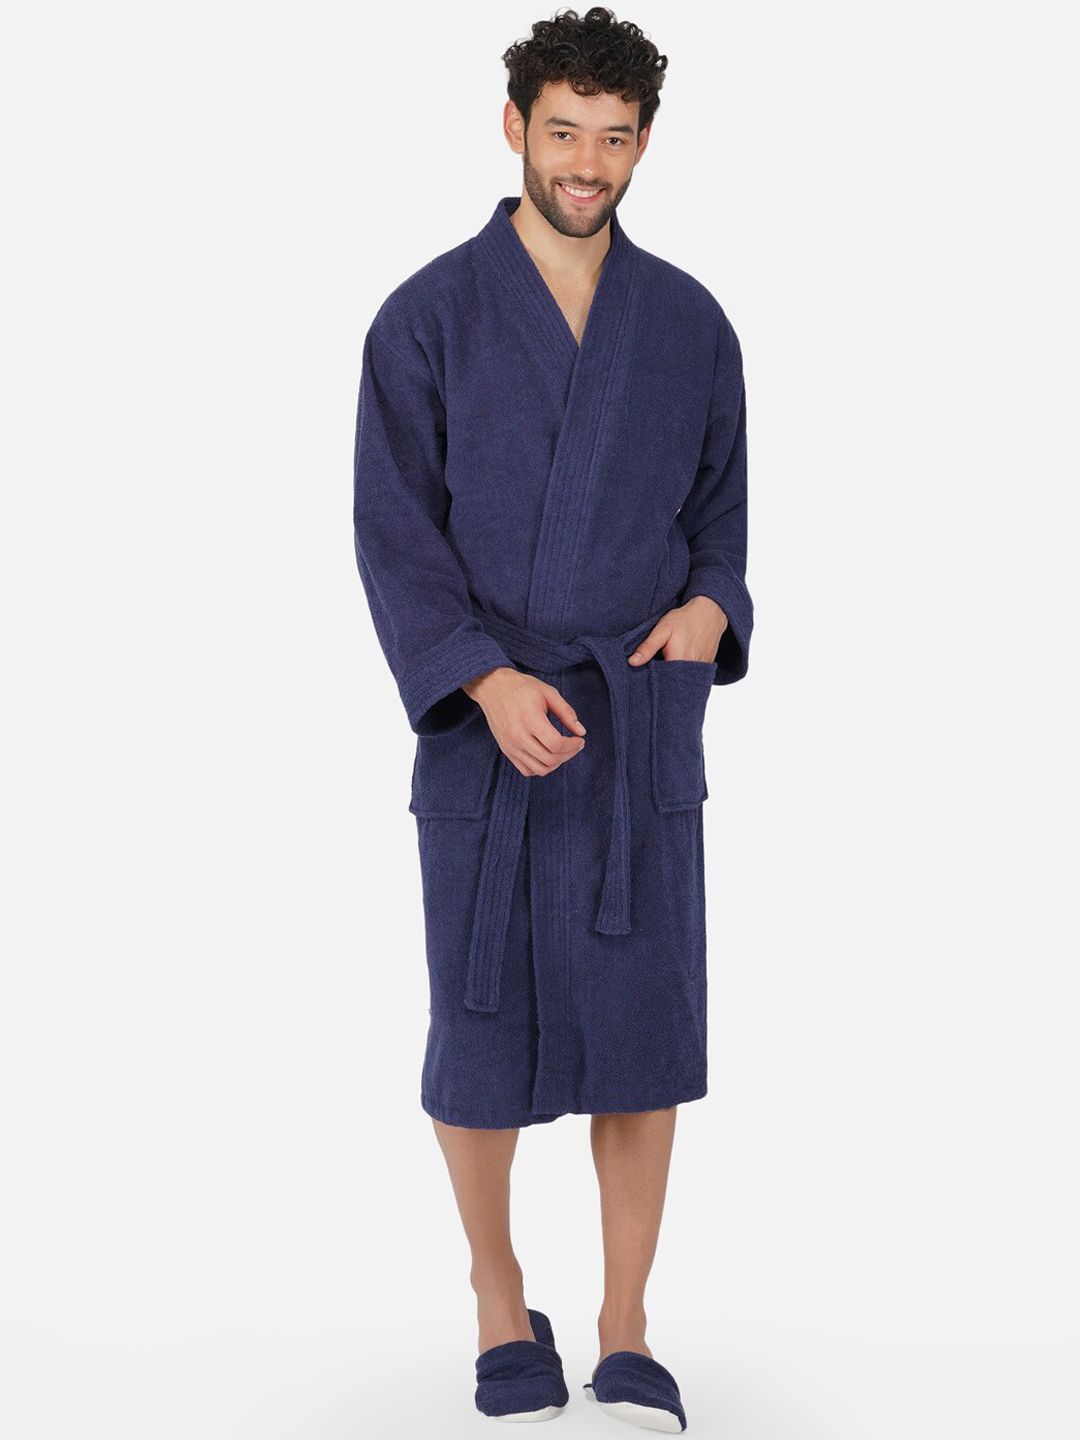 RANGOLI Unisex Navy Blue Pure Cotton 400 GSM Large Bath Robe with Slippers Price in India